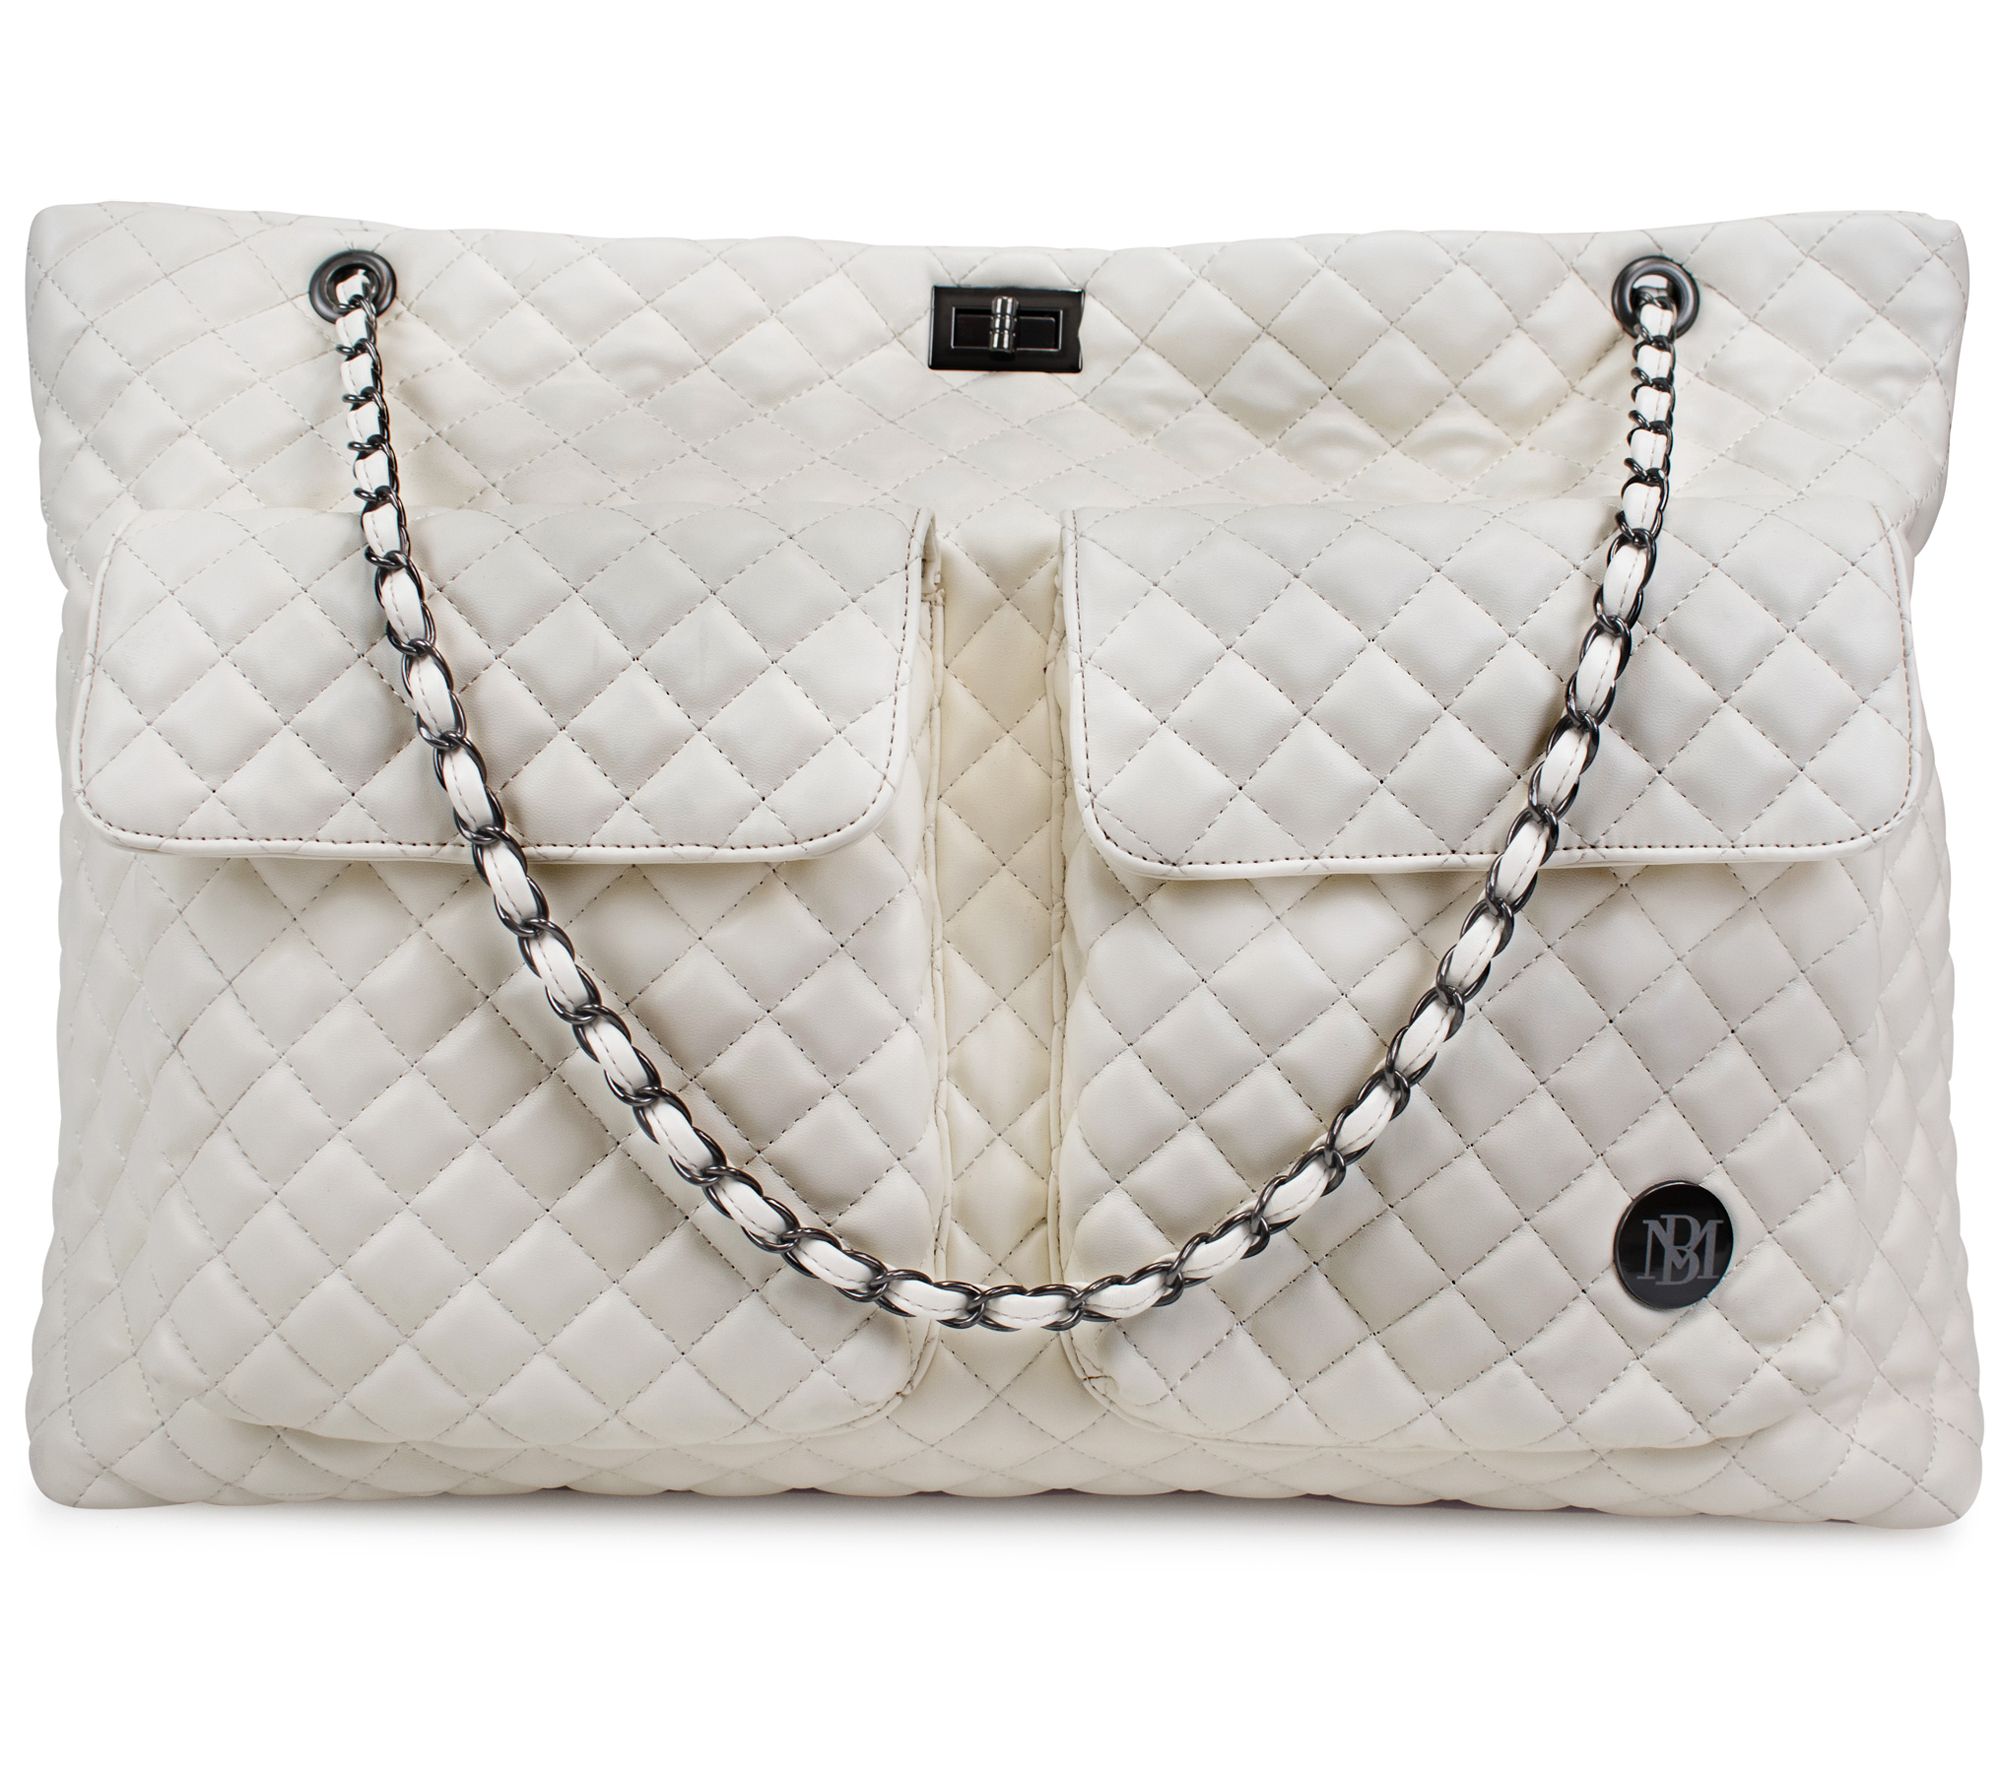 Chanel Dreams in XXL - Occasionally Luxe